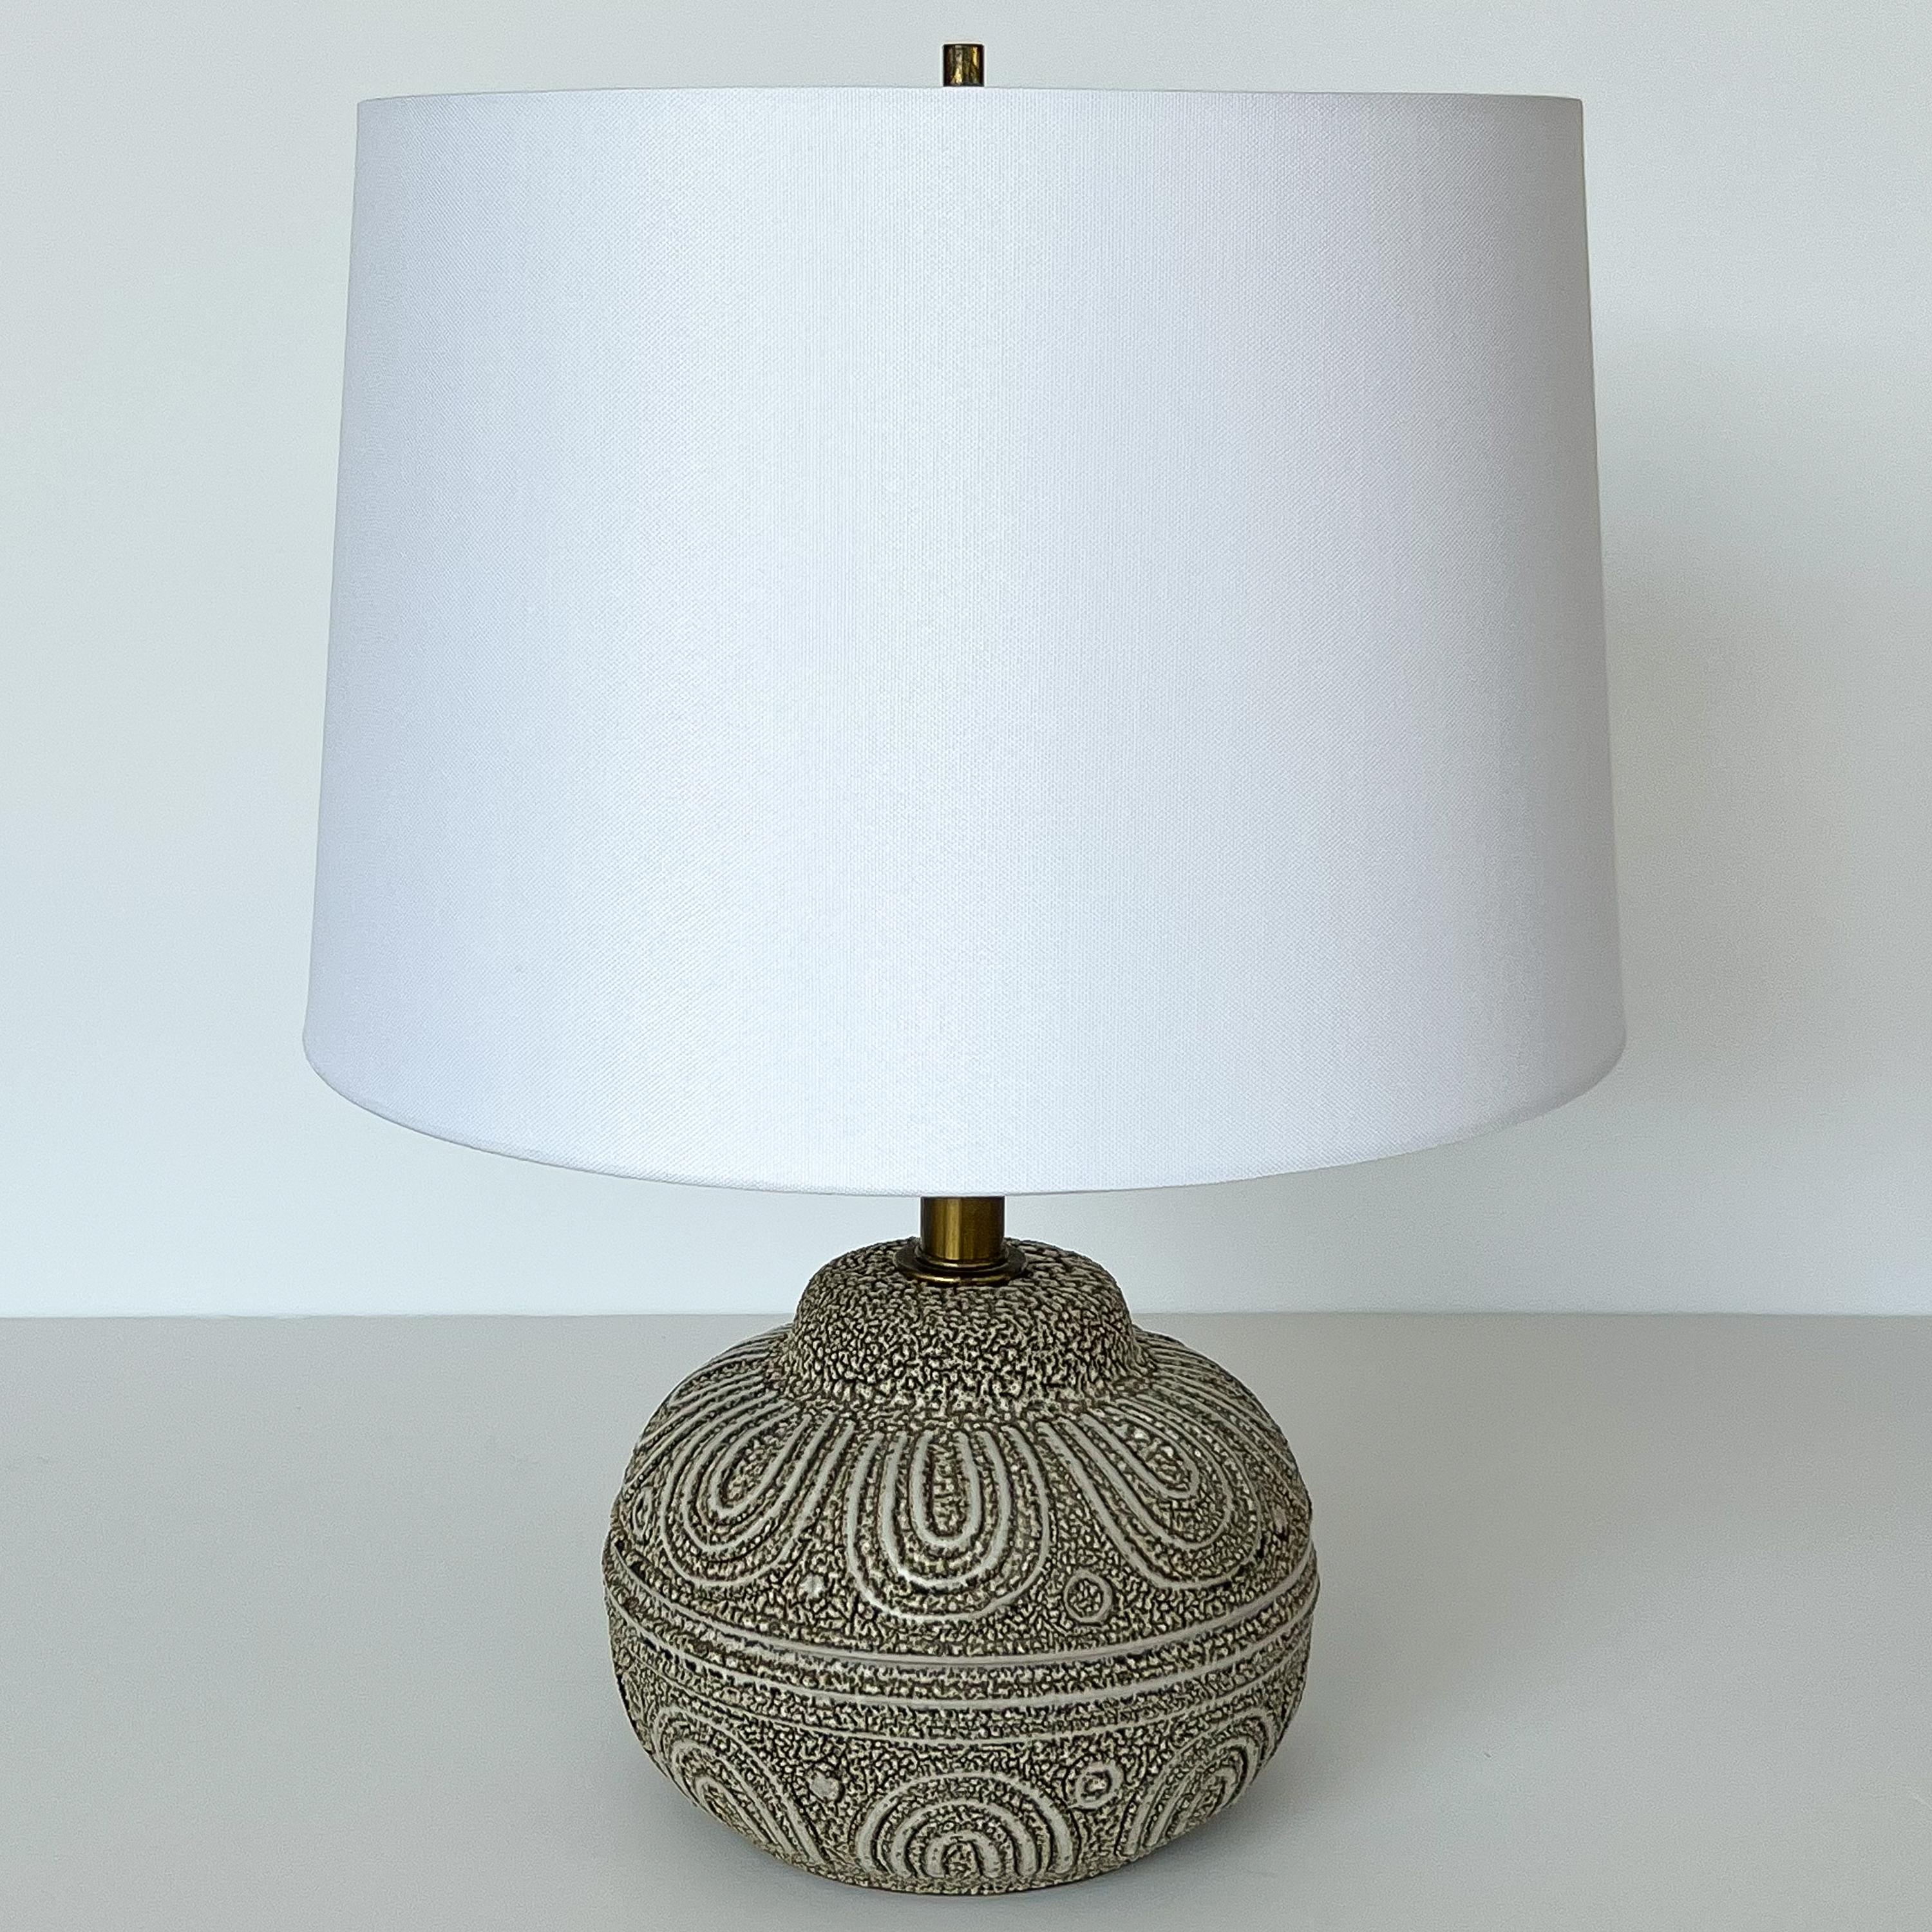 An early Lee Rosen for Design Technics textured ceramic table lamp, circa 1950s. Textured / nubby ceramic earthenware body comprised of a speckled glaze with contrasting matte lines in an abstract motif. Brass stem, harp and cylindrical finial.